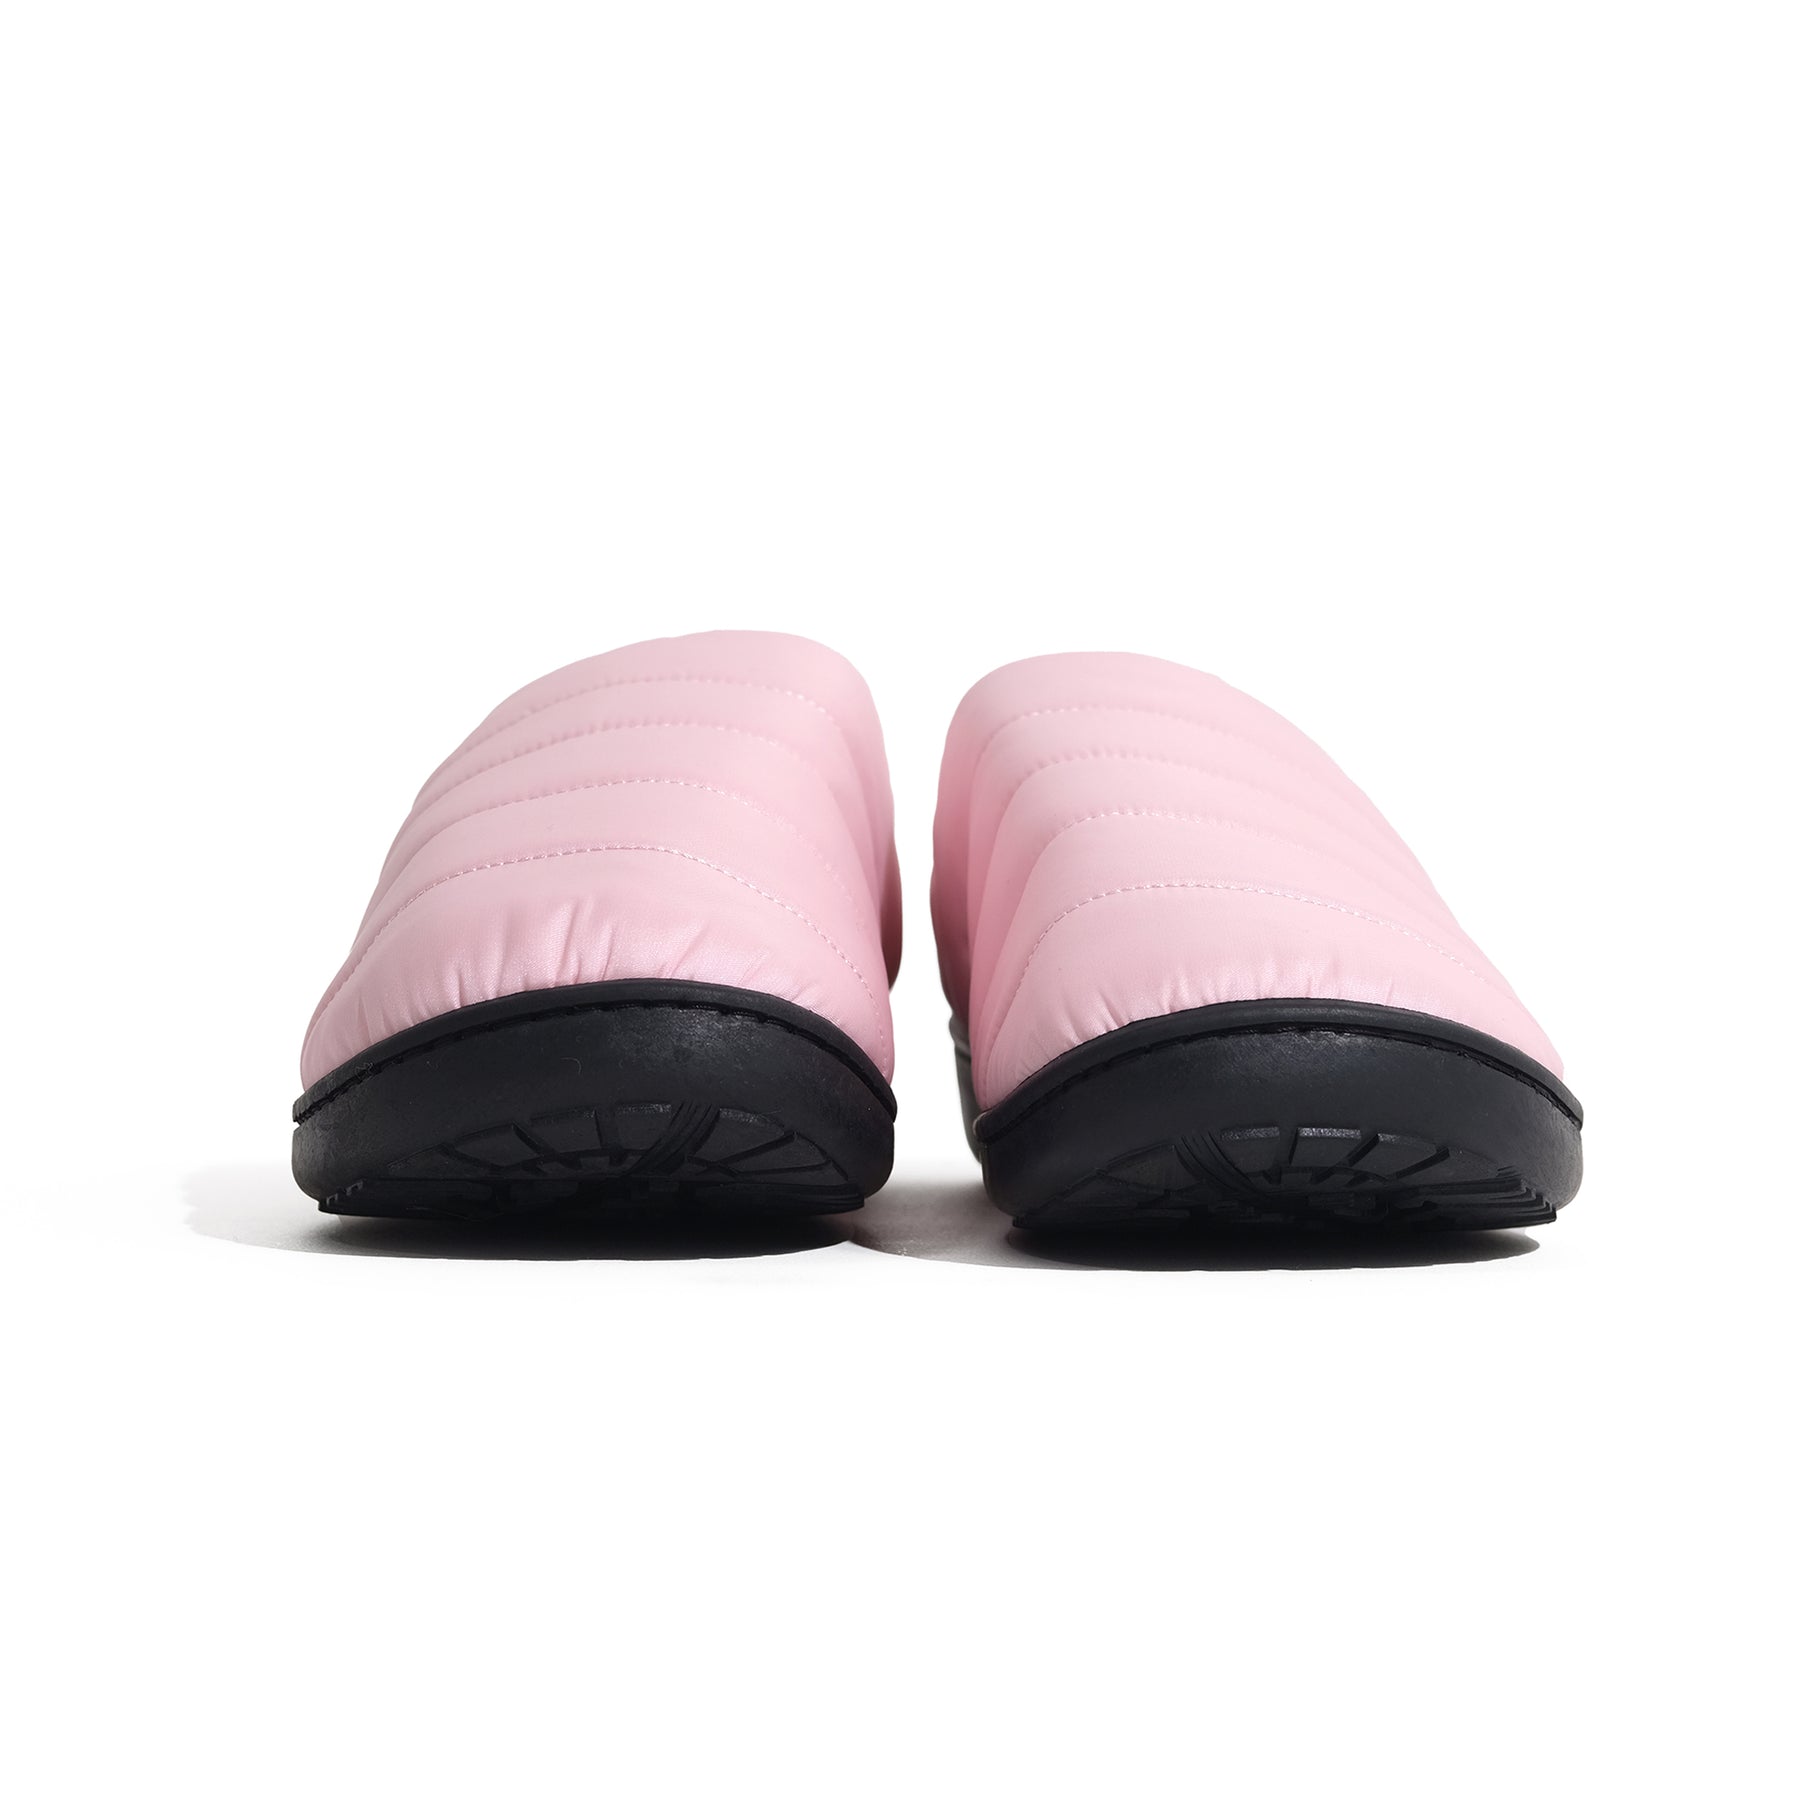 AMEICO - Official US Distributor of SUBU - Fall & Winter Slippers - Pink